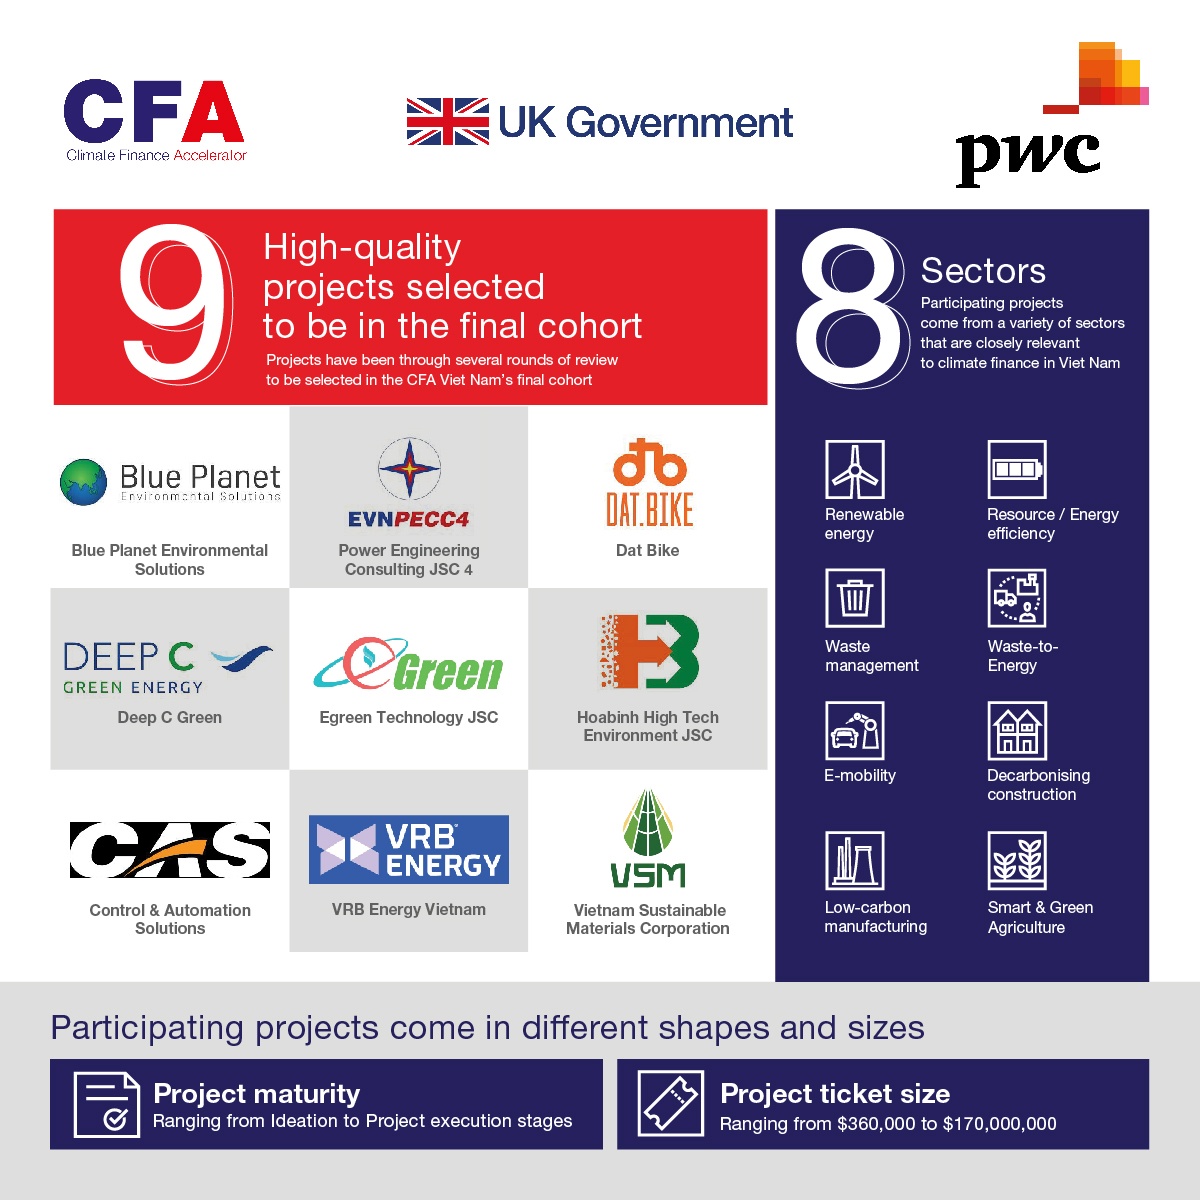 Innovative low-carbon projects join UK's climate finance scheme